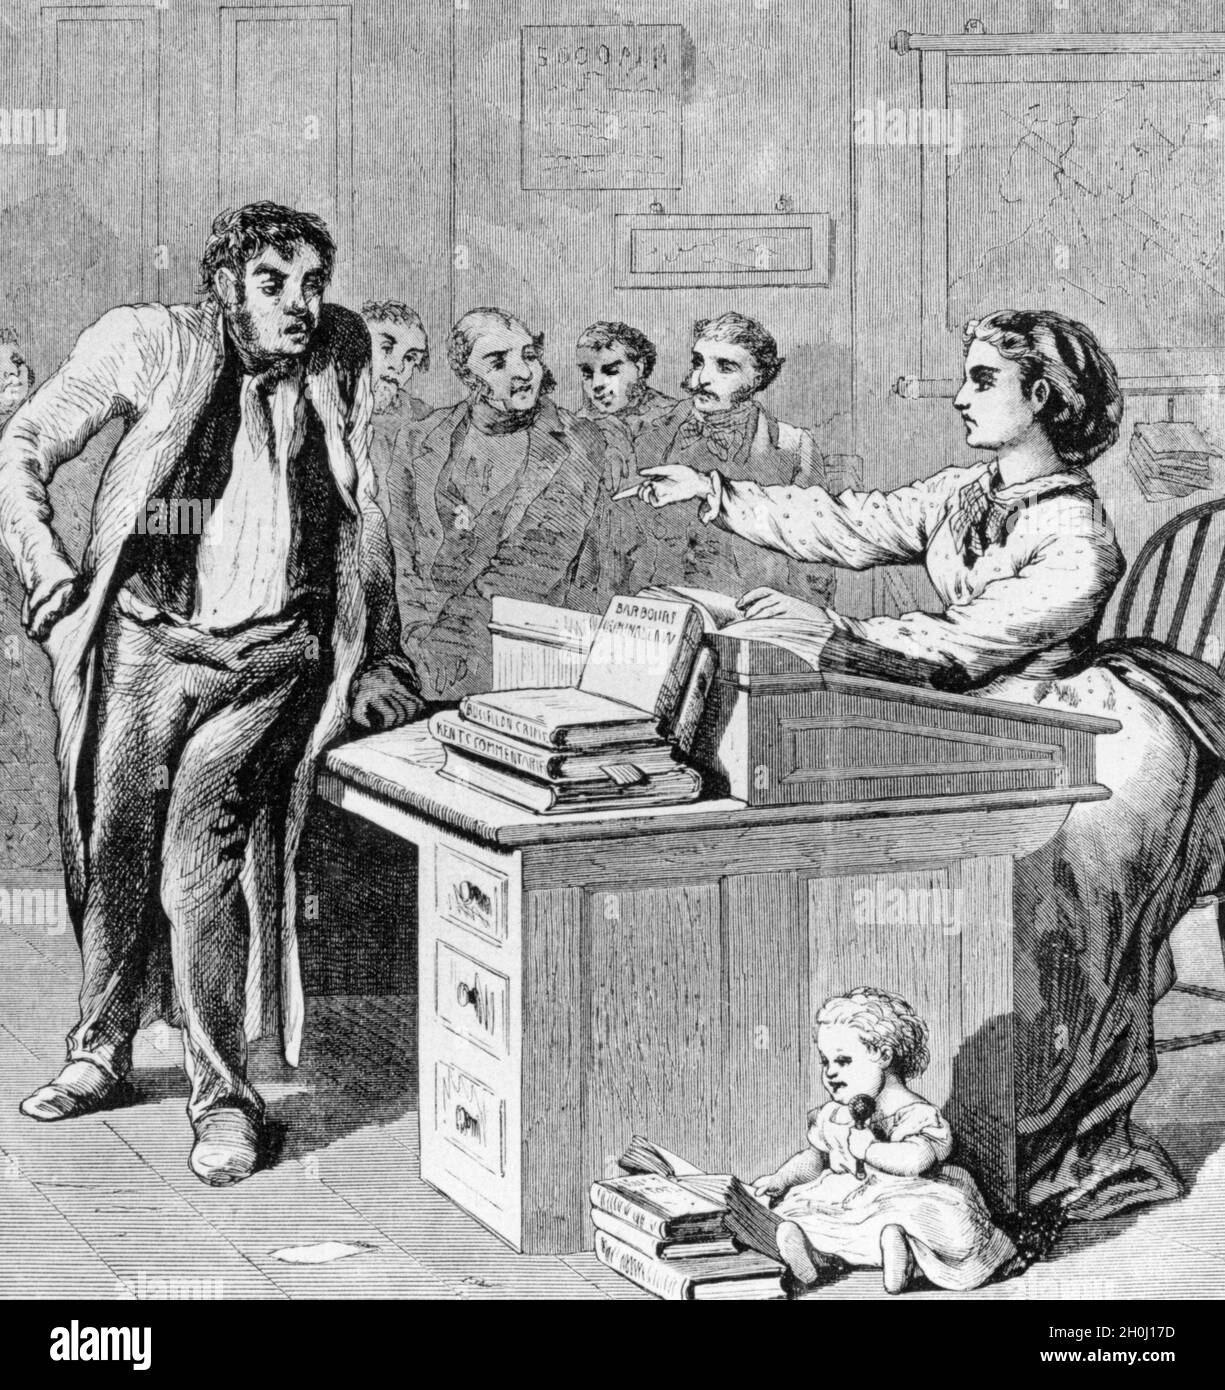 'In her office as a justice of the peace in the US state of Missouri, a woman condemns her husband, who has abandoned her, as a ''drunkard''. Sitting next to her is the couple's child. In 1872, women in the US were given the right to vote on municipal and county matters. They could also be delegated to serve as jurors or judges. [automated translation]' Stock Photo